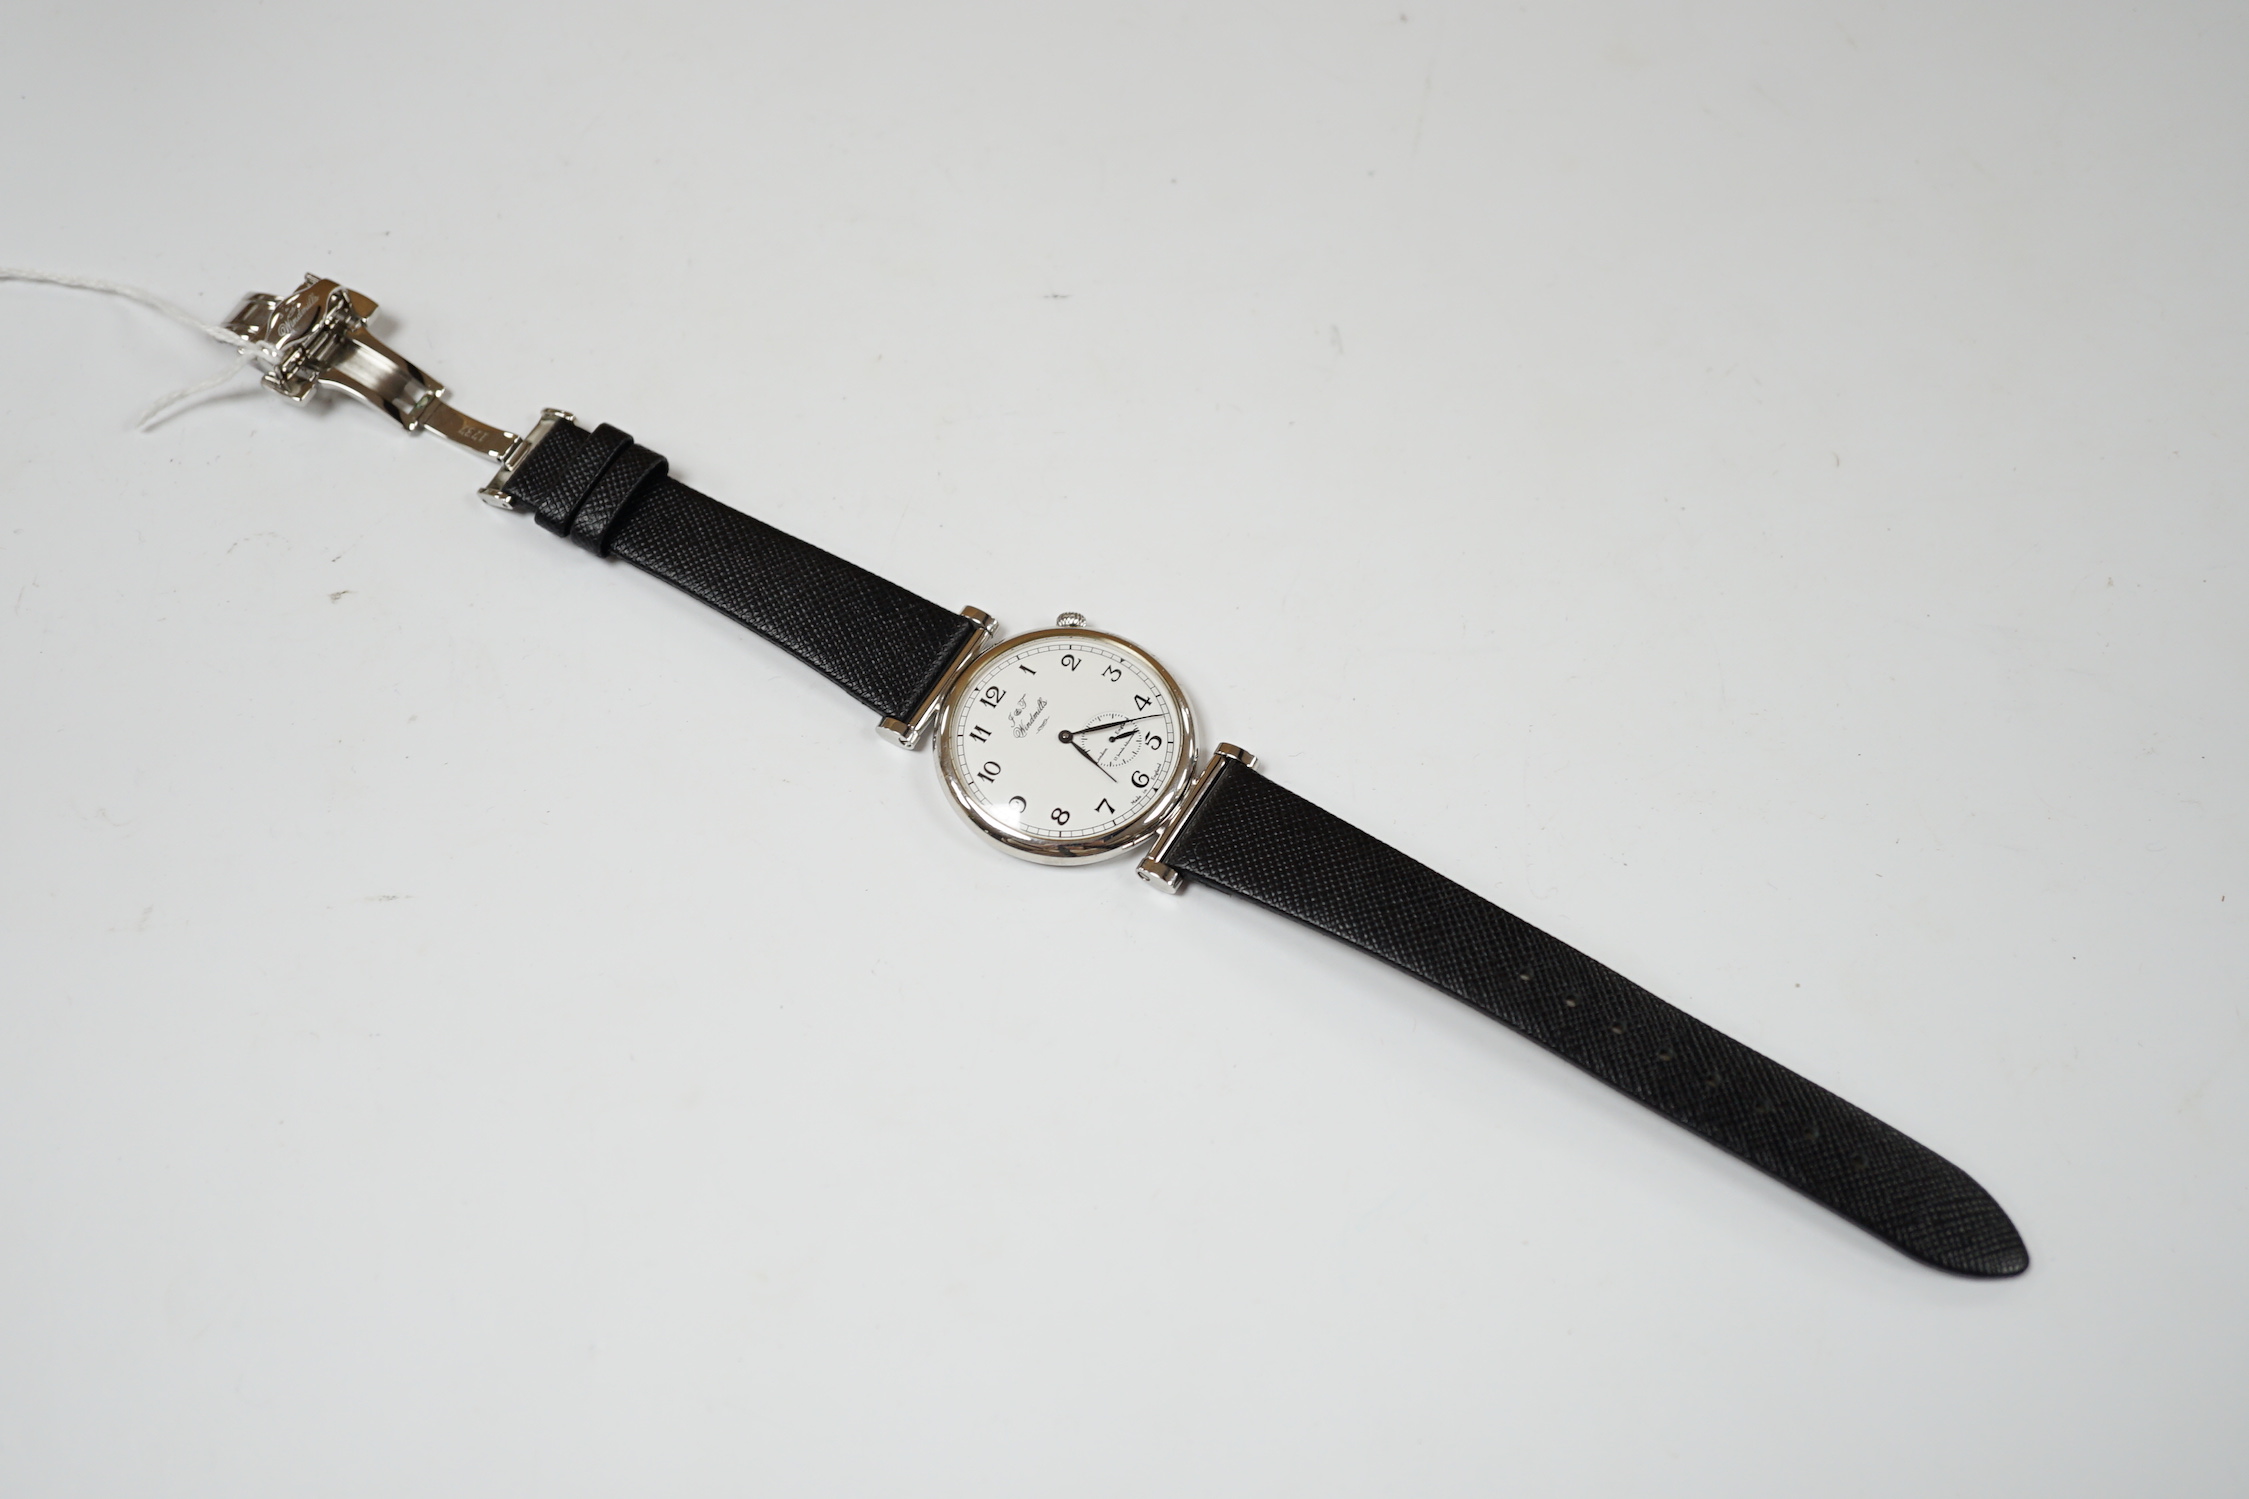 A gentleman's 2006 Joseph & Thomas Windmills Bartholomew First Edition white metal (stamped 950 for platinum) manual wind wrist watch, numbered 00144/00150, on leather strap with stainless steel deployment clasp, with or